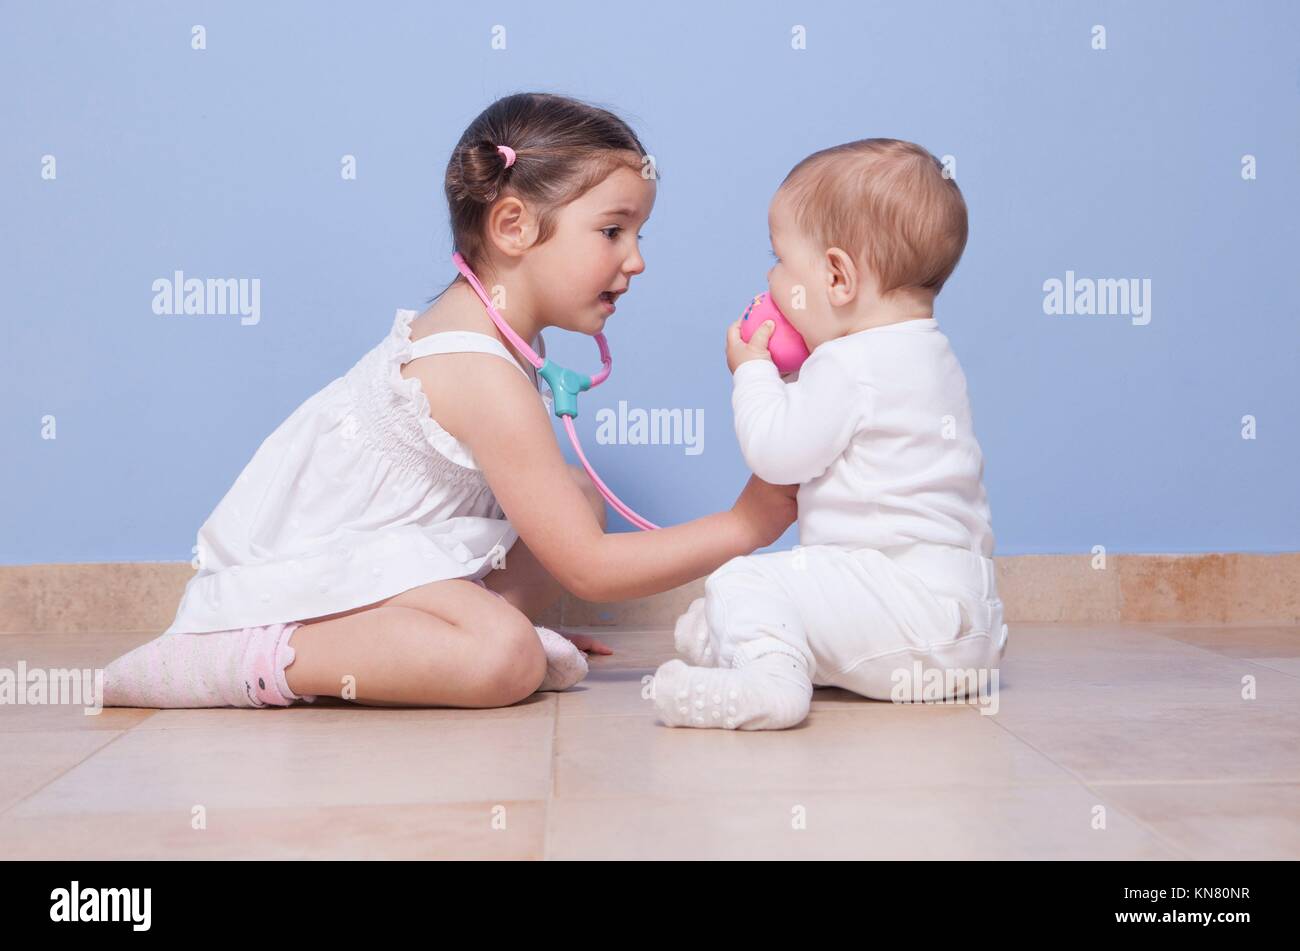 Baby brother and toddler sister playing doctor with stethoscope. Stock Photo